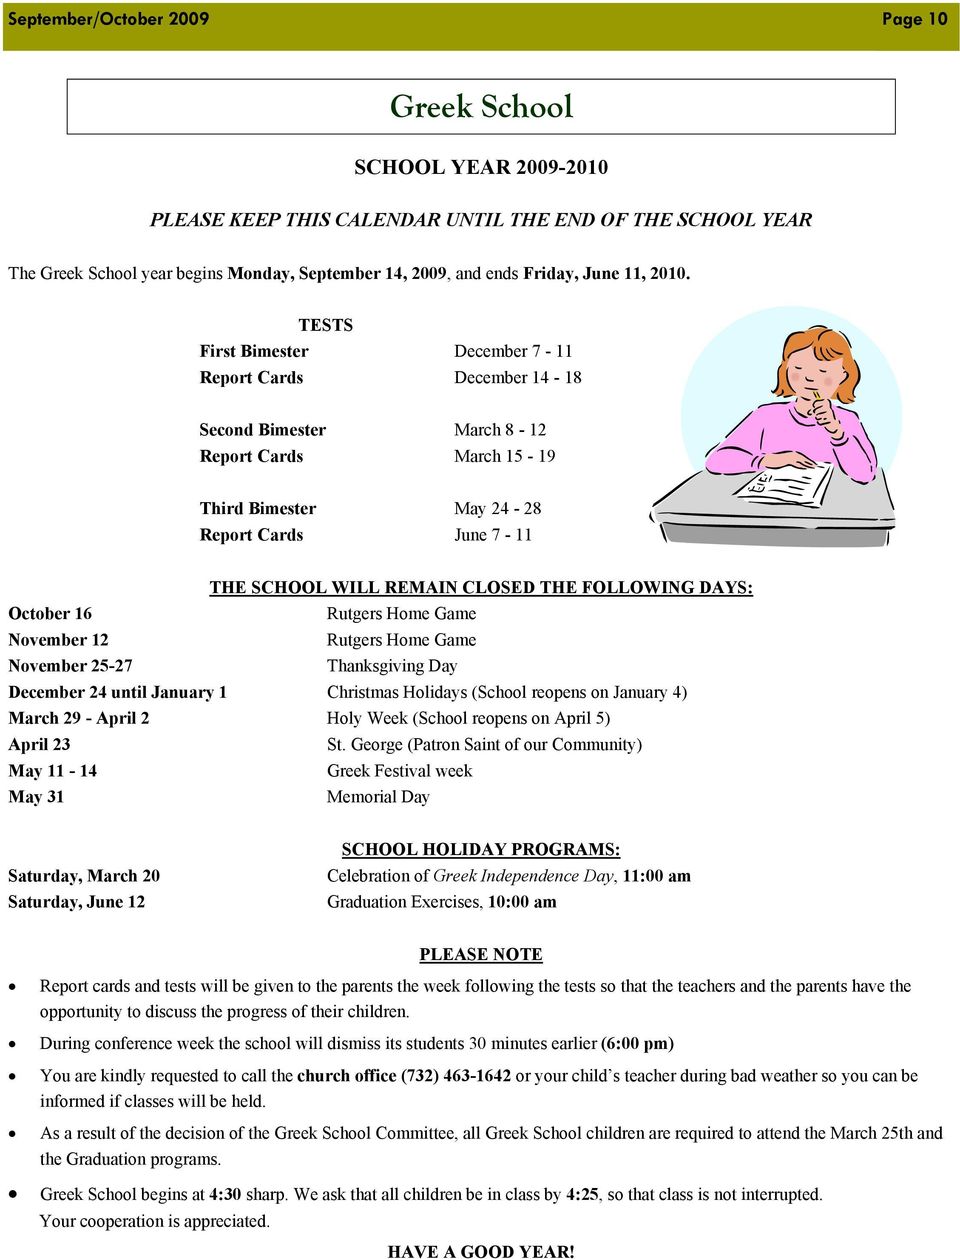 TESTS First Bimester December 7-11 Report Cards December 14-18 Second Bimester March 8-12 Report Cards March 15-19 Third Bimester May 24-28 Report Cards June 7-11 THE SCHOOL WILL REMAIN CLOSED THE